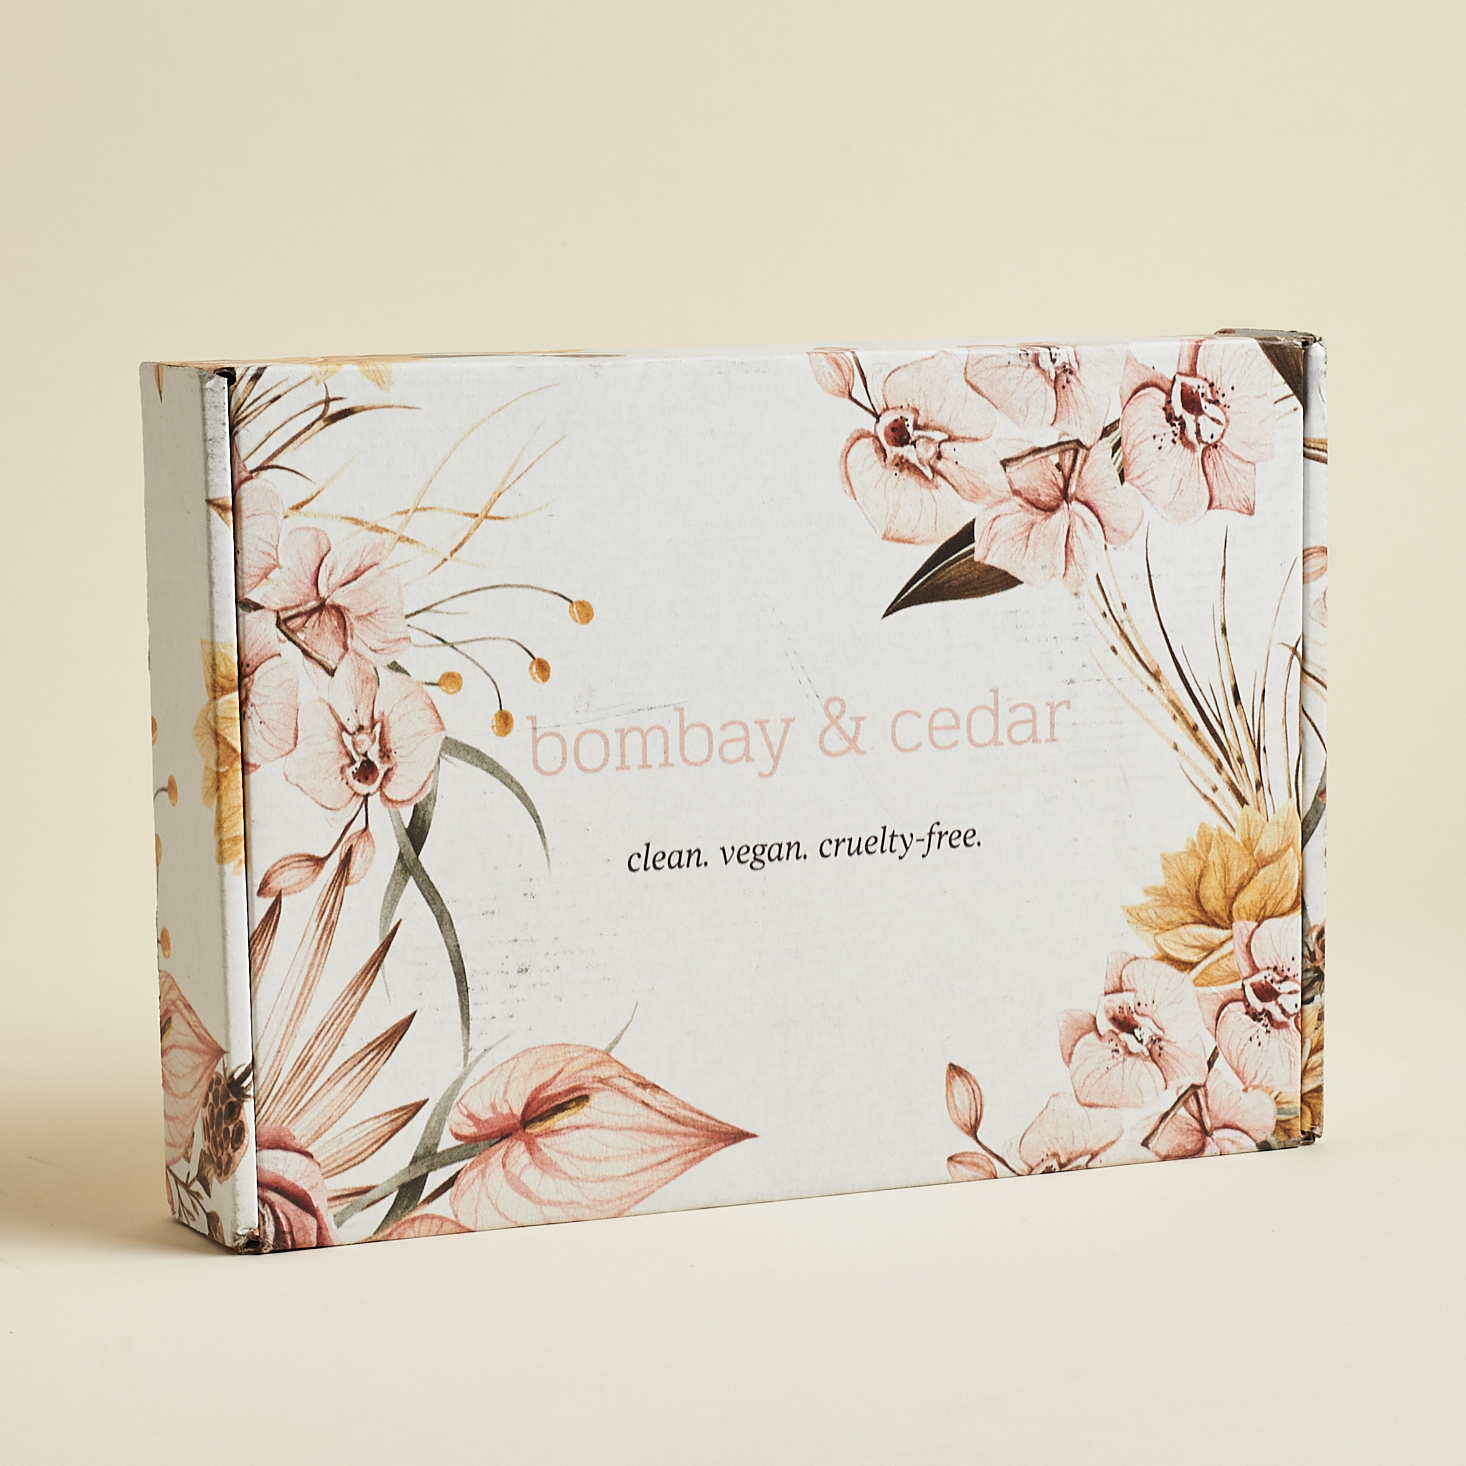 The Beauty Box by Bombay & Cedar Review – June 2020